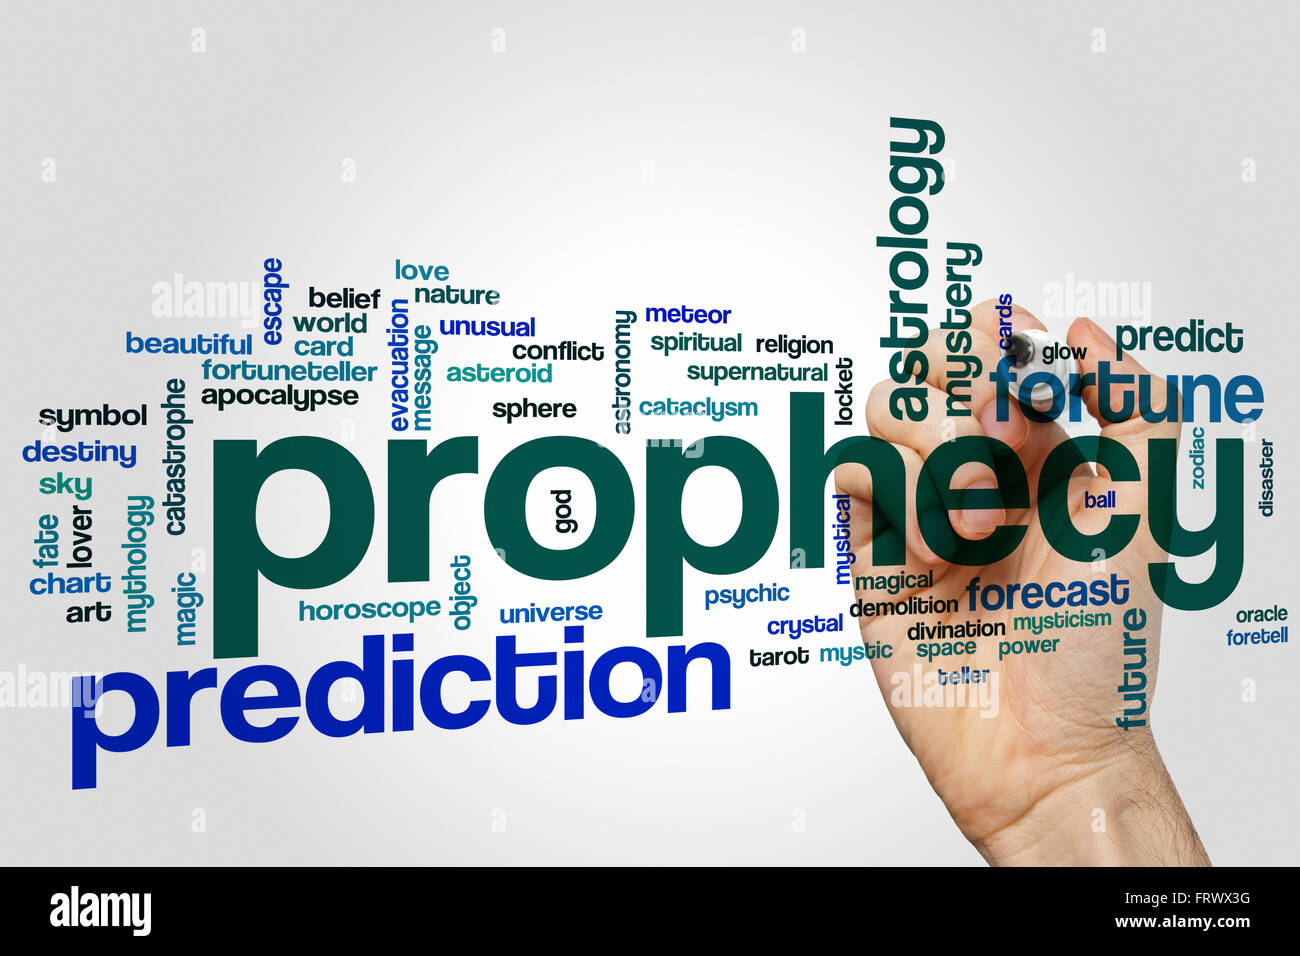 Prophecy word cloud concept with prediction fortune related tags Stock Photo